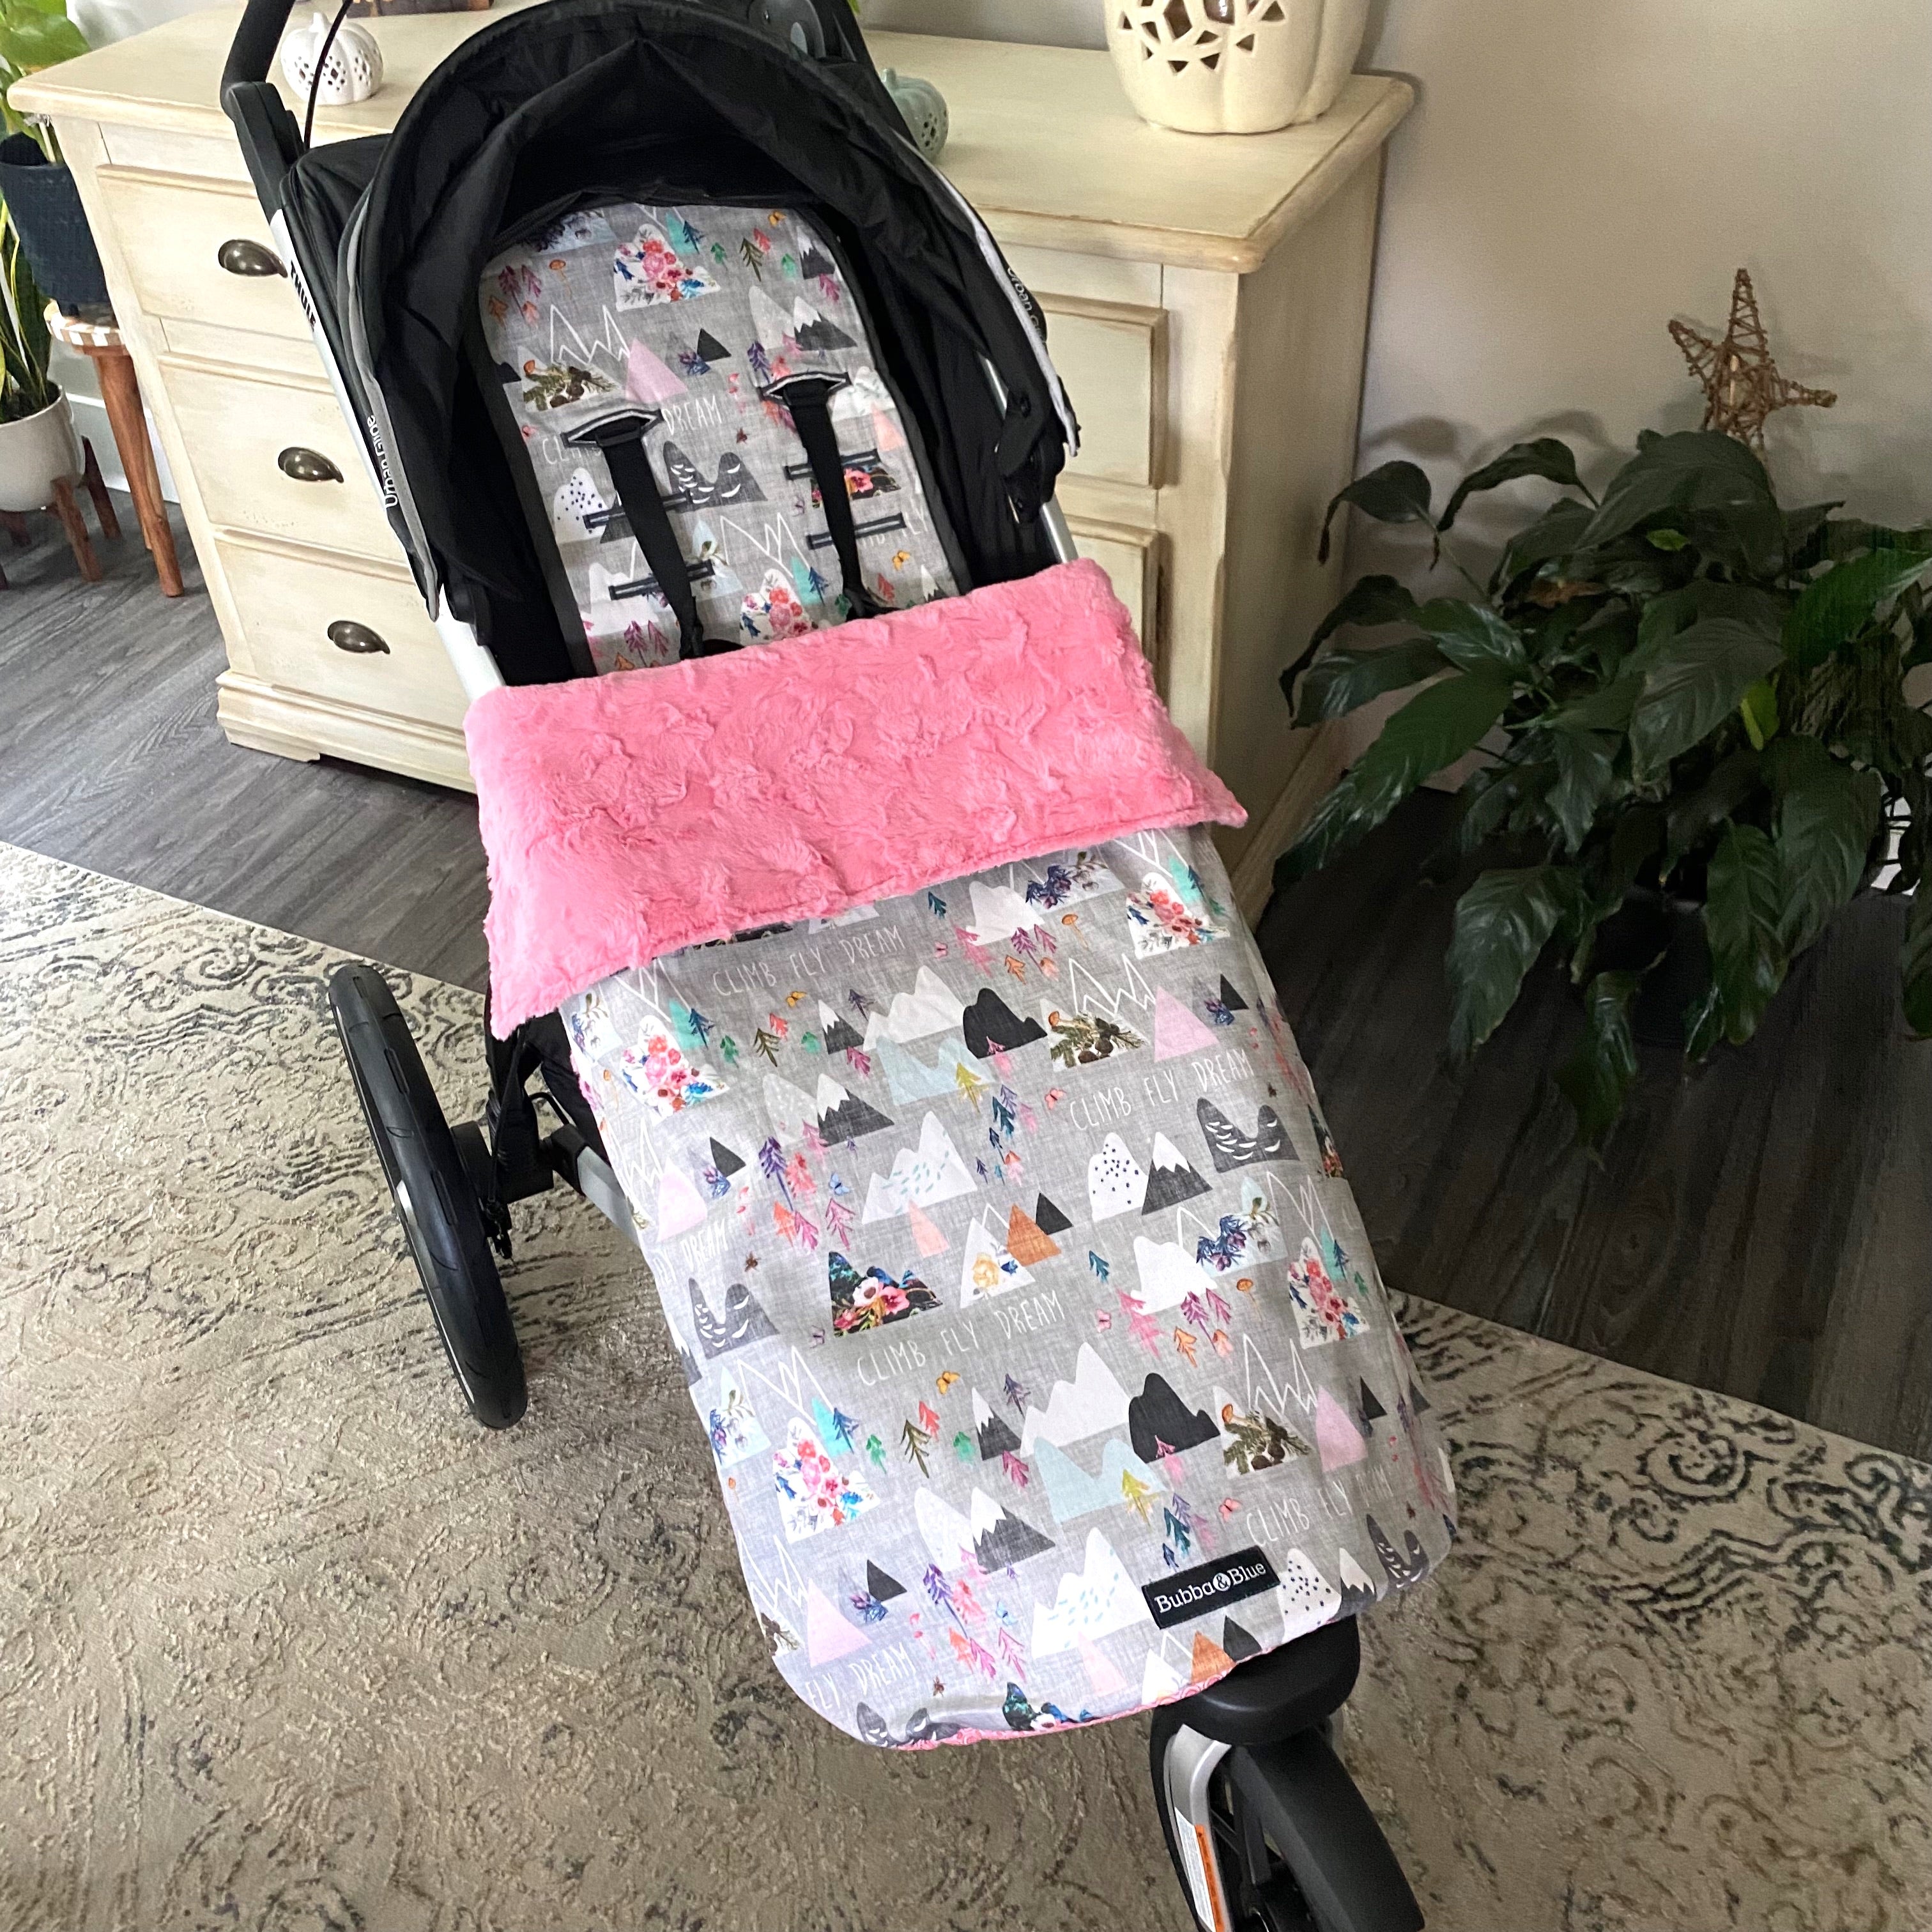 Stroller liner and foormuff set made to fit most strollers. Get a custom fit for a wide variety of strollers. These save your seat from wear and tear.